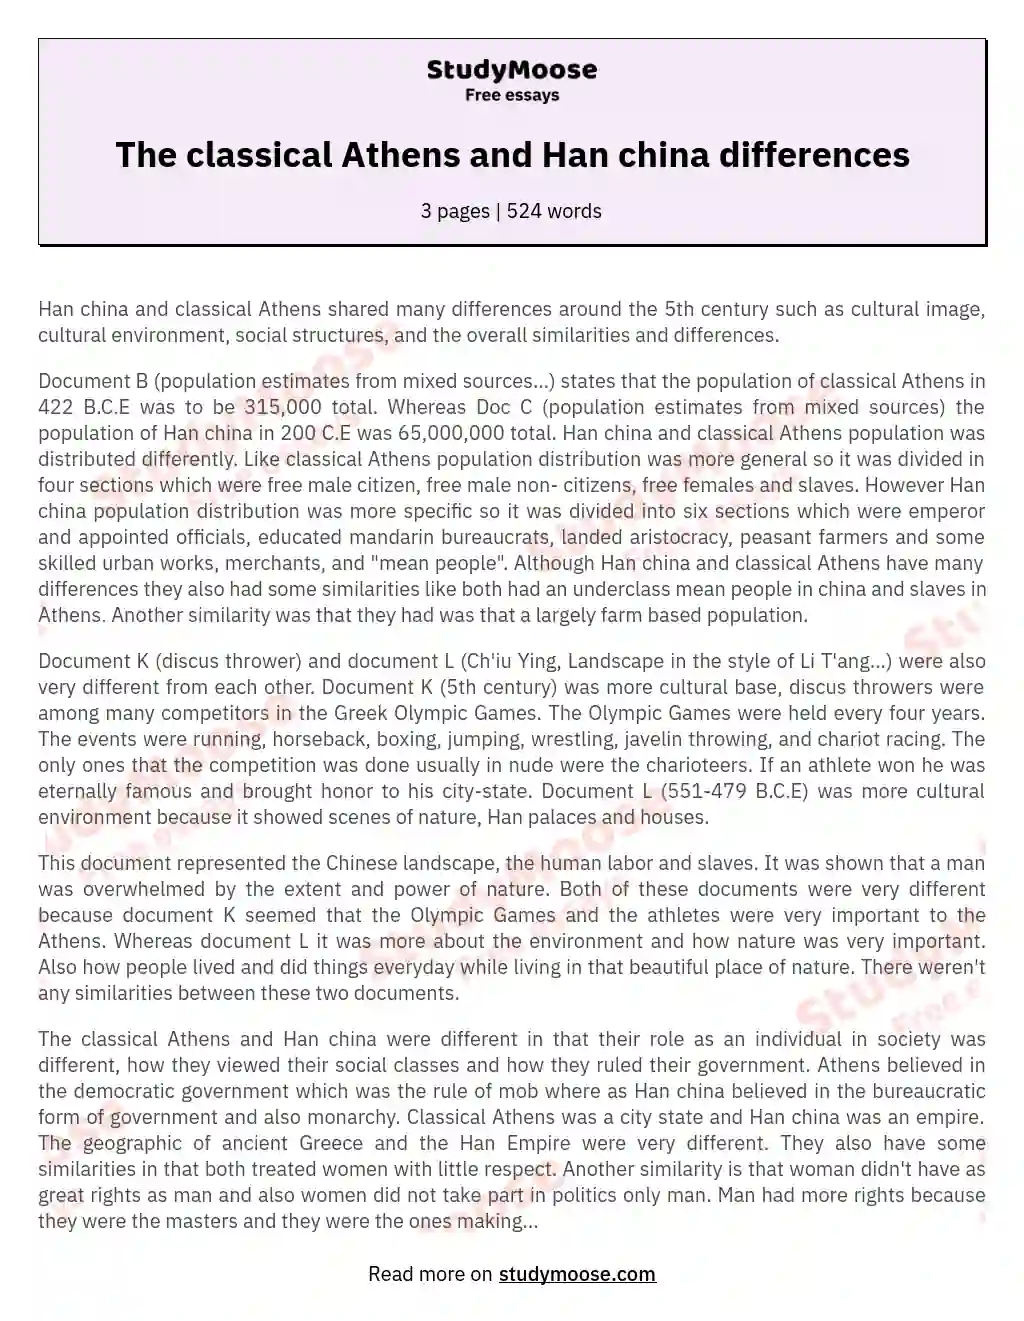 The classical Athens and Han china differences